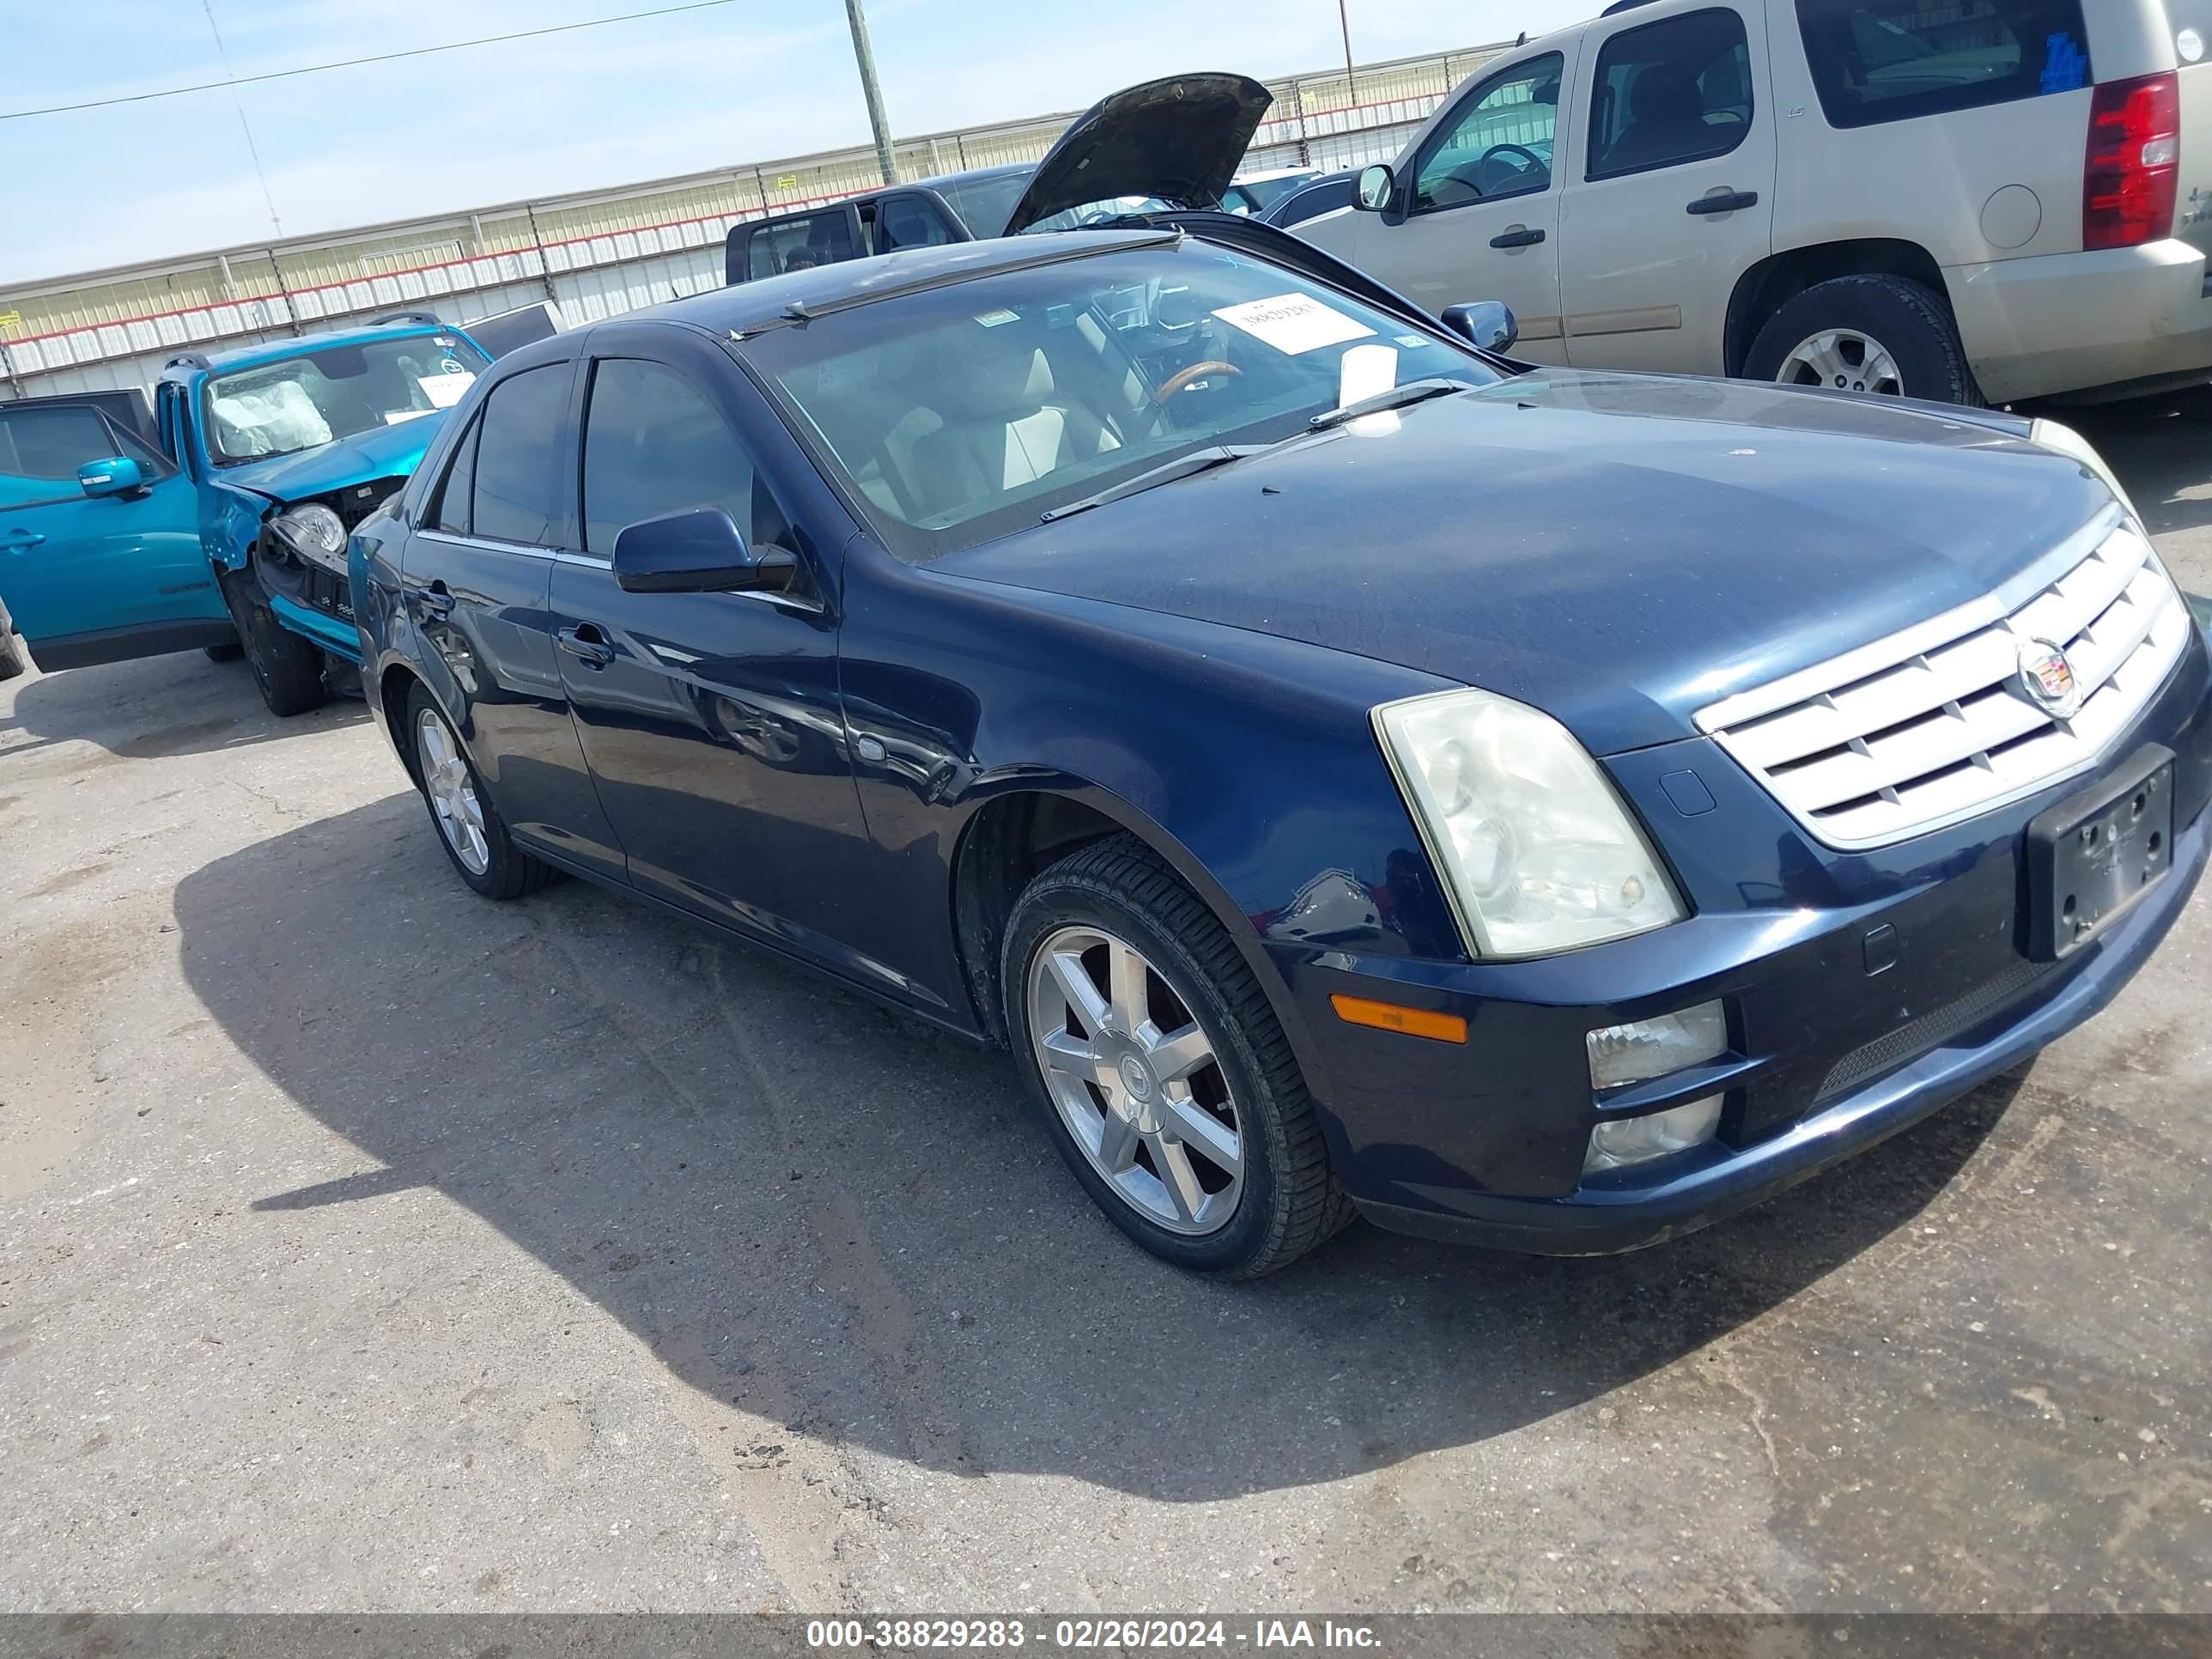 VIN: 1G6DC67A250210720 - cadillac sts